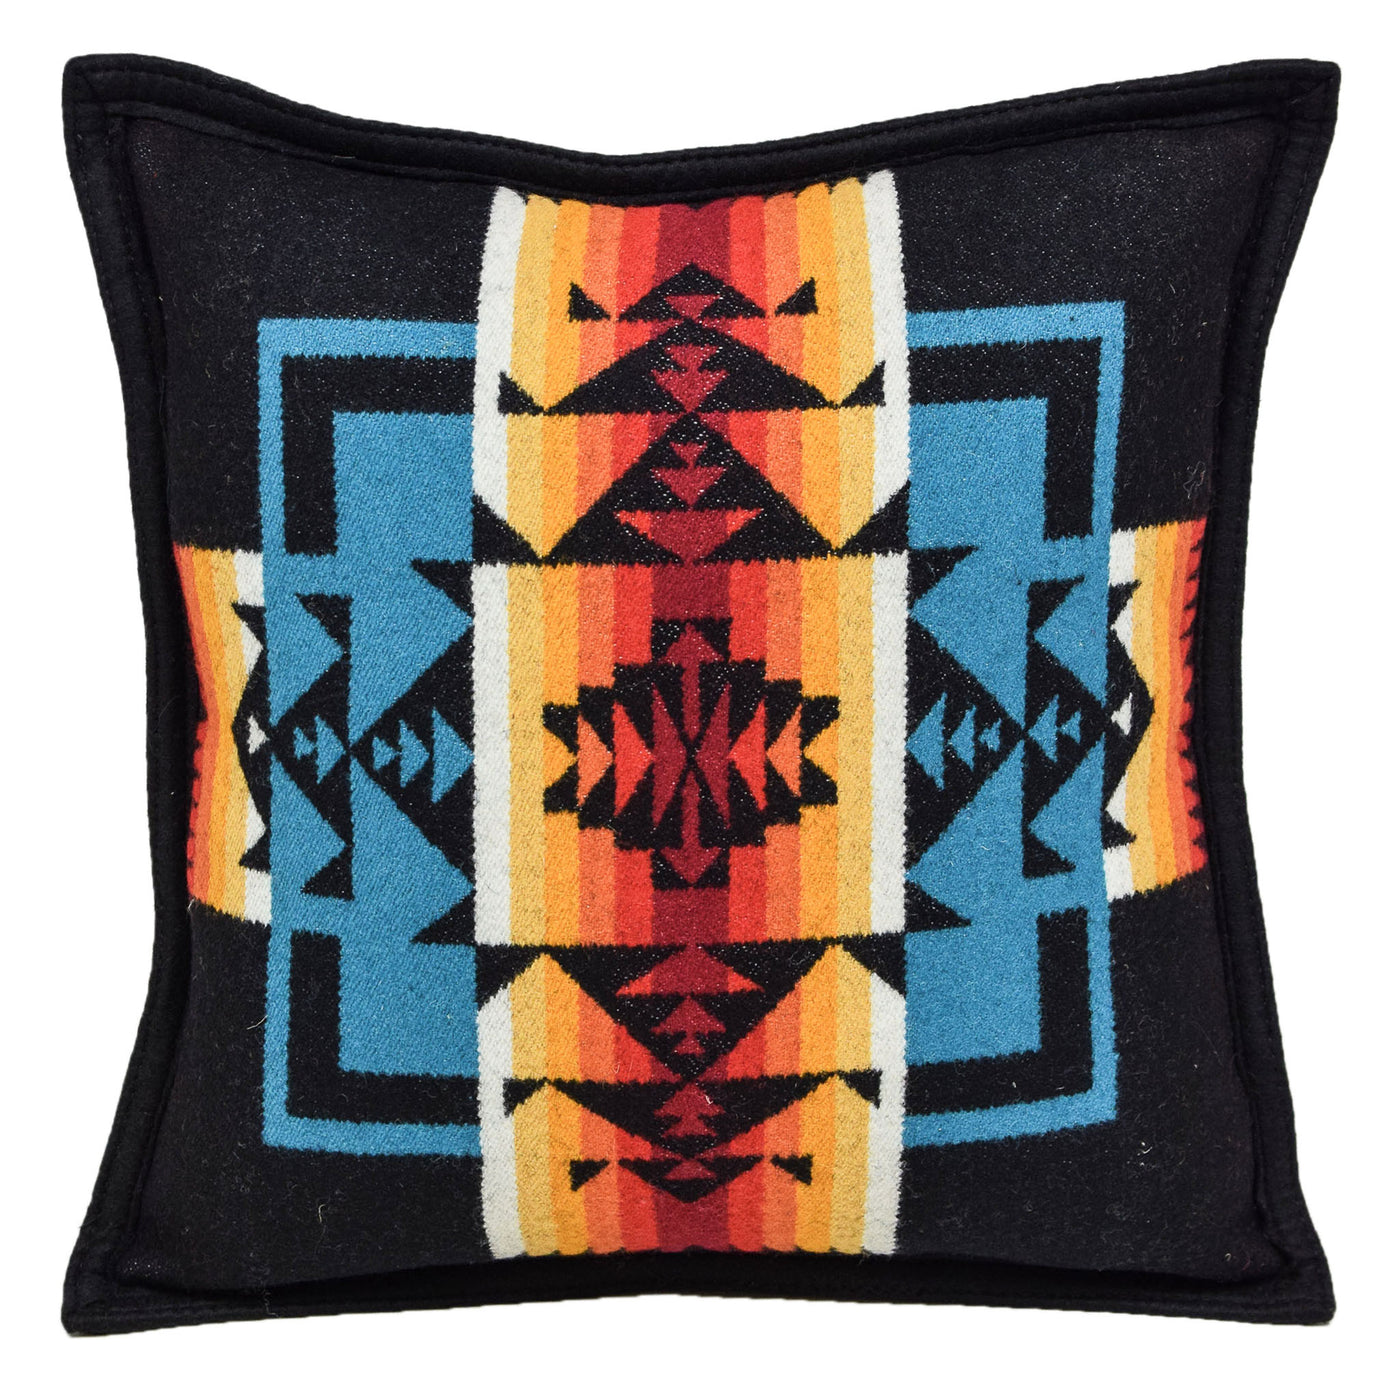 Pendleton Chief Joseph Patterned Cushion Black Made in the USA FRONT